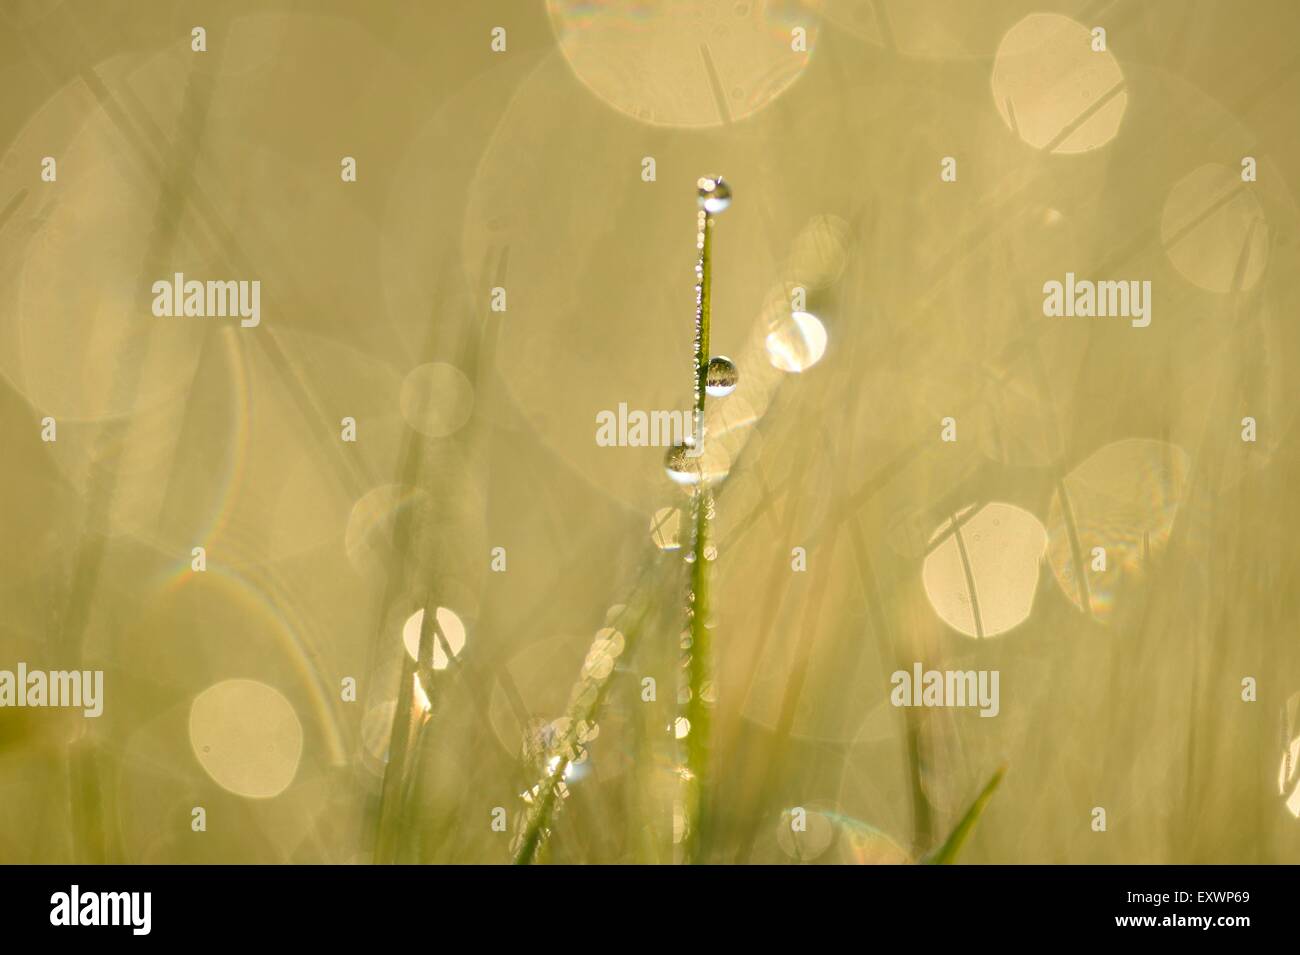 Grass blades with waterdrops in a meadow Stock Photo